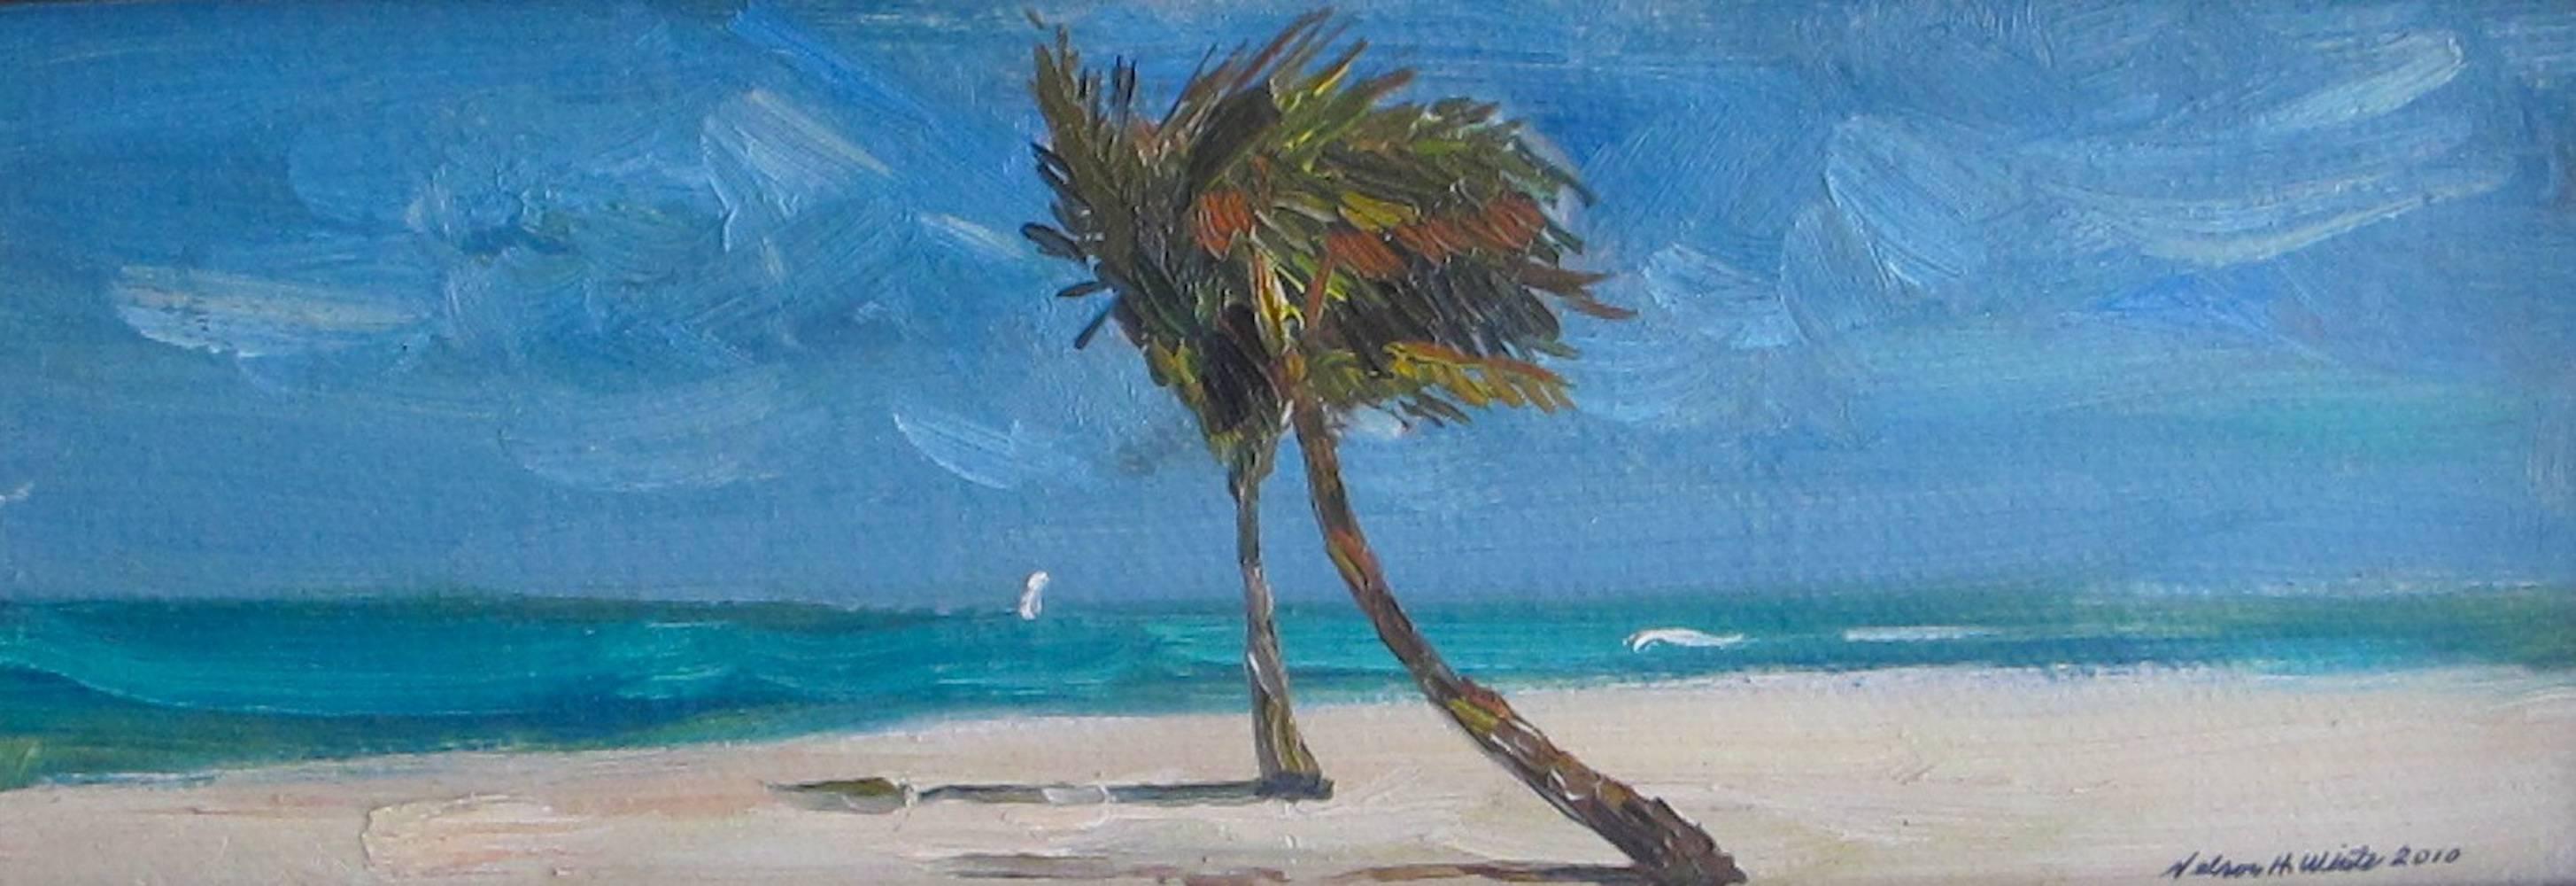 Nelson H. White Landscape Painting - "The Royal Palms" - contemporary american impressionist painting, small scale